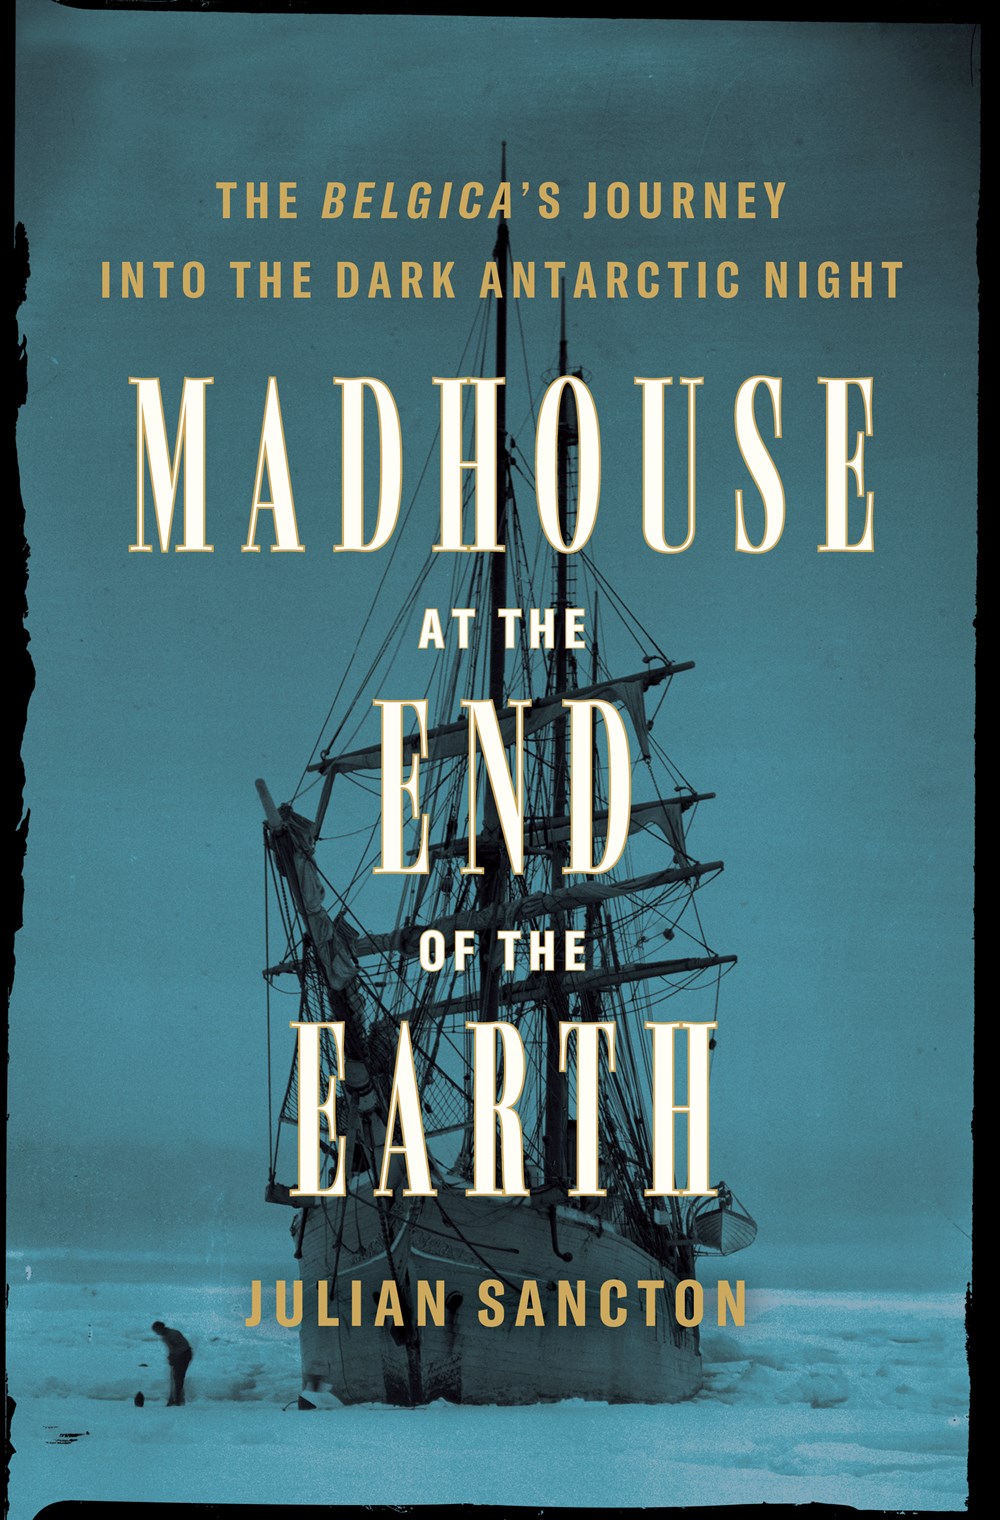 The cover of Julian Sancton's 'Madhouse at the End of the Earth'.